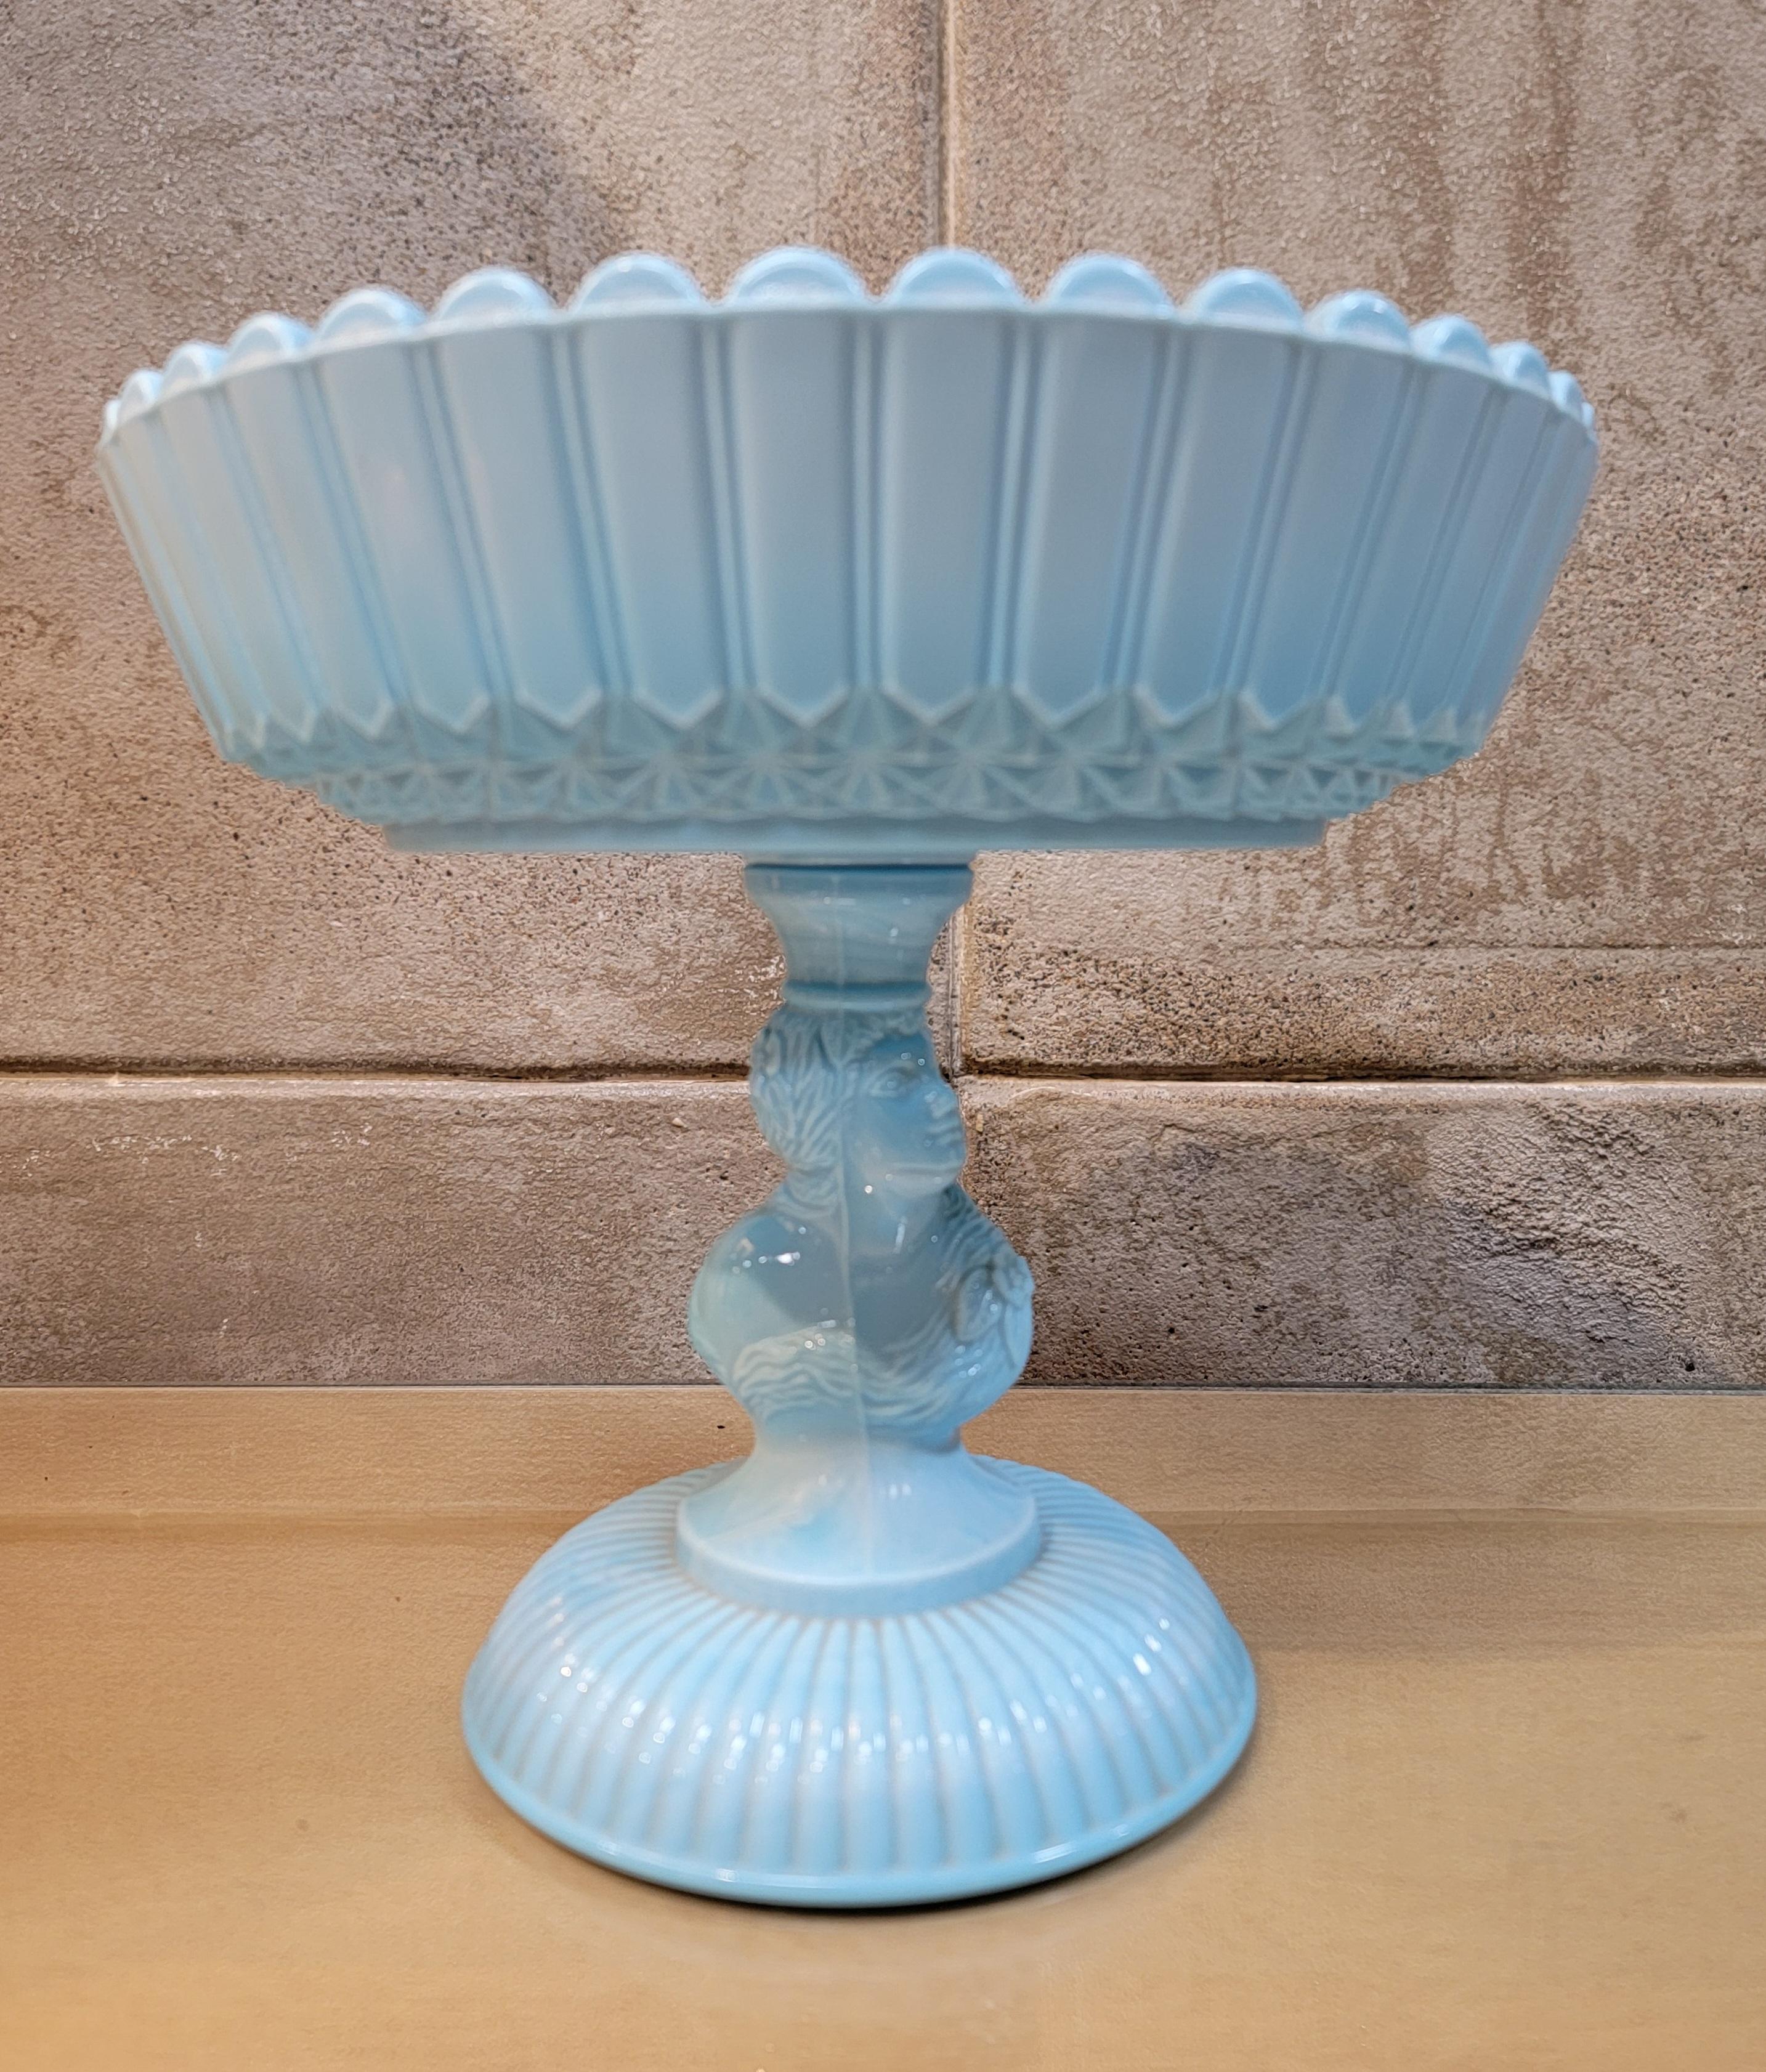 Antique pattern glass figurative compote by Challinor Taylor Glass, circa. 1890. 